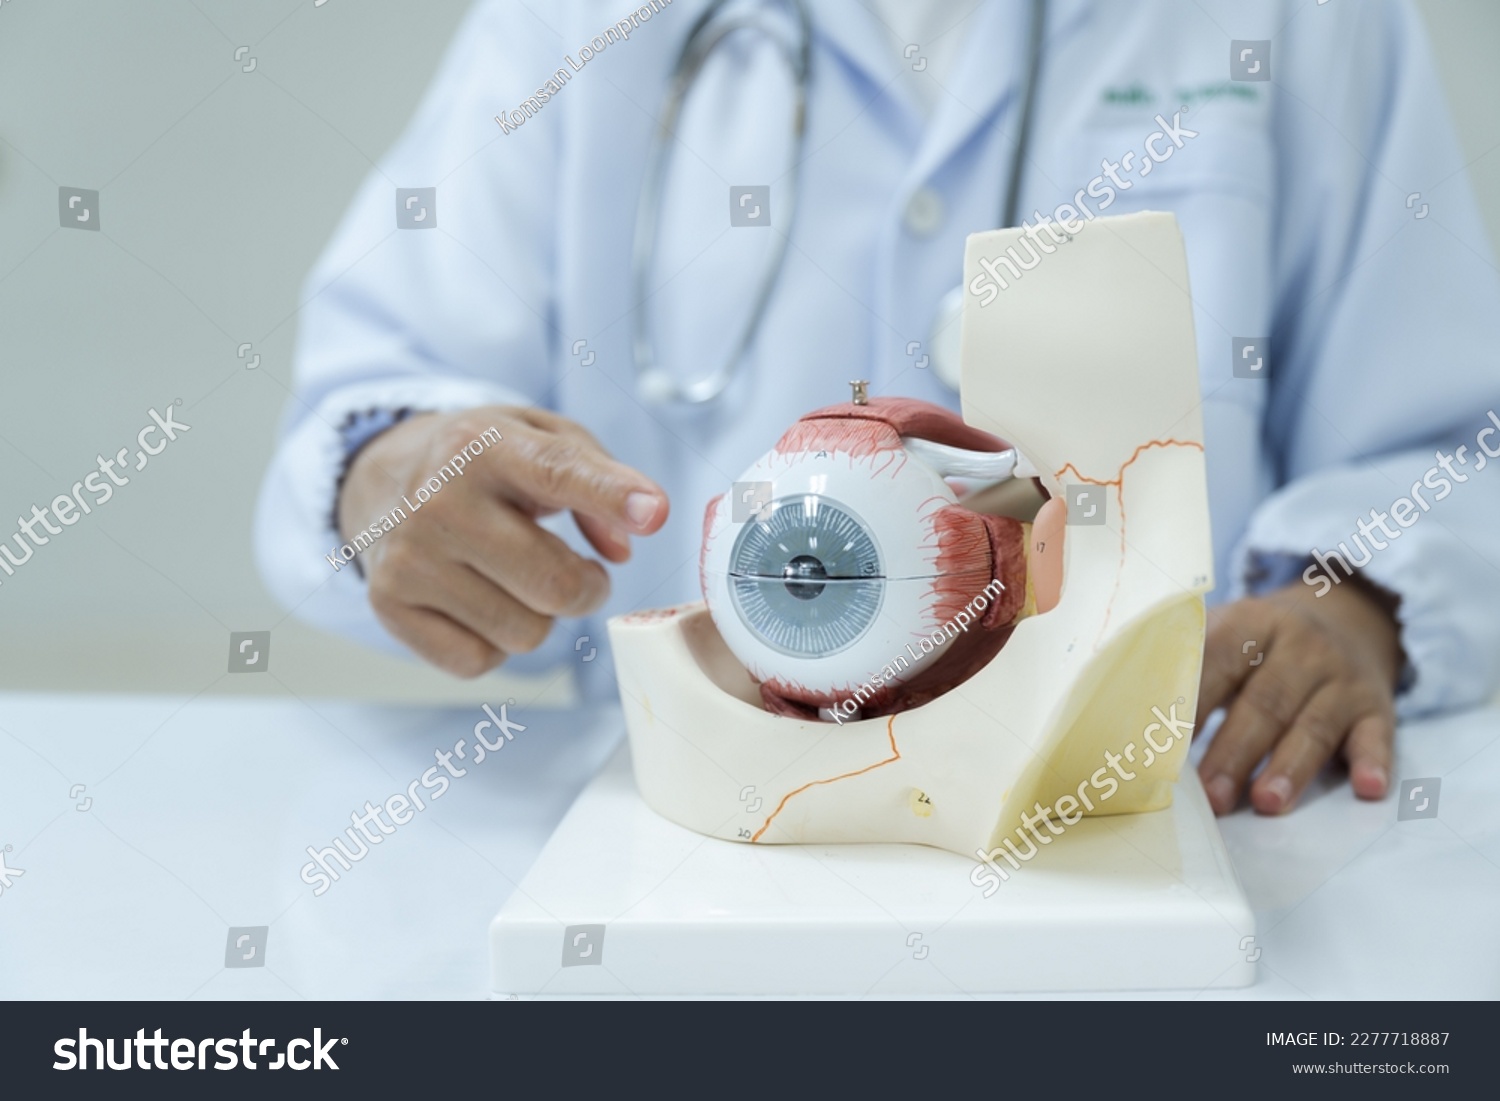 Ophthalmologist hand pointing eye anatomy human model on white background.Part of human body model with organ system for health student study in university.Human eye model.Medical education concept. #2277718887